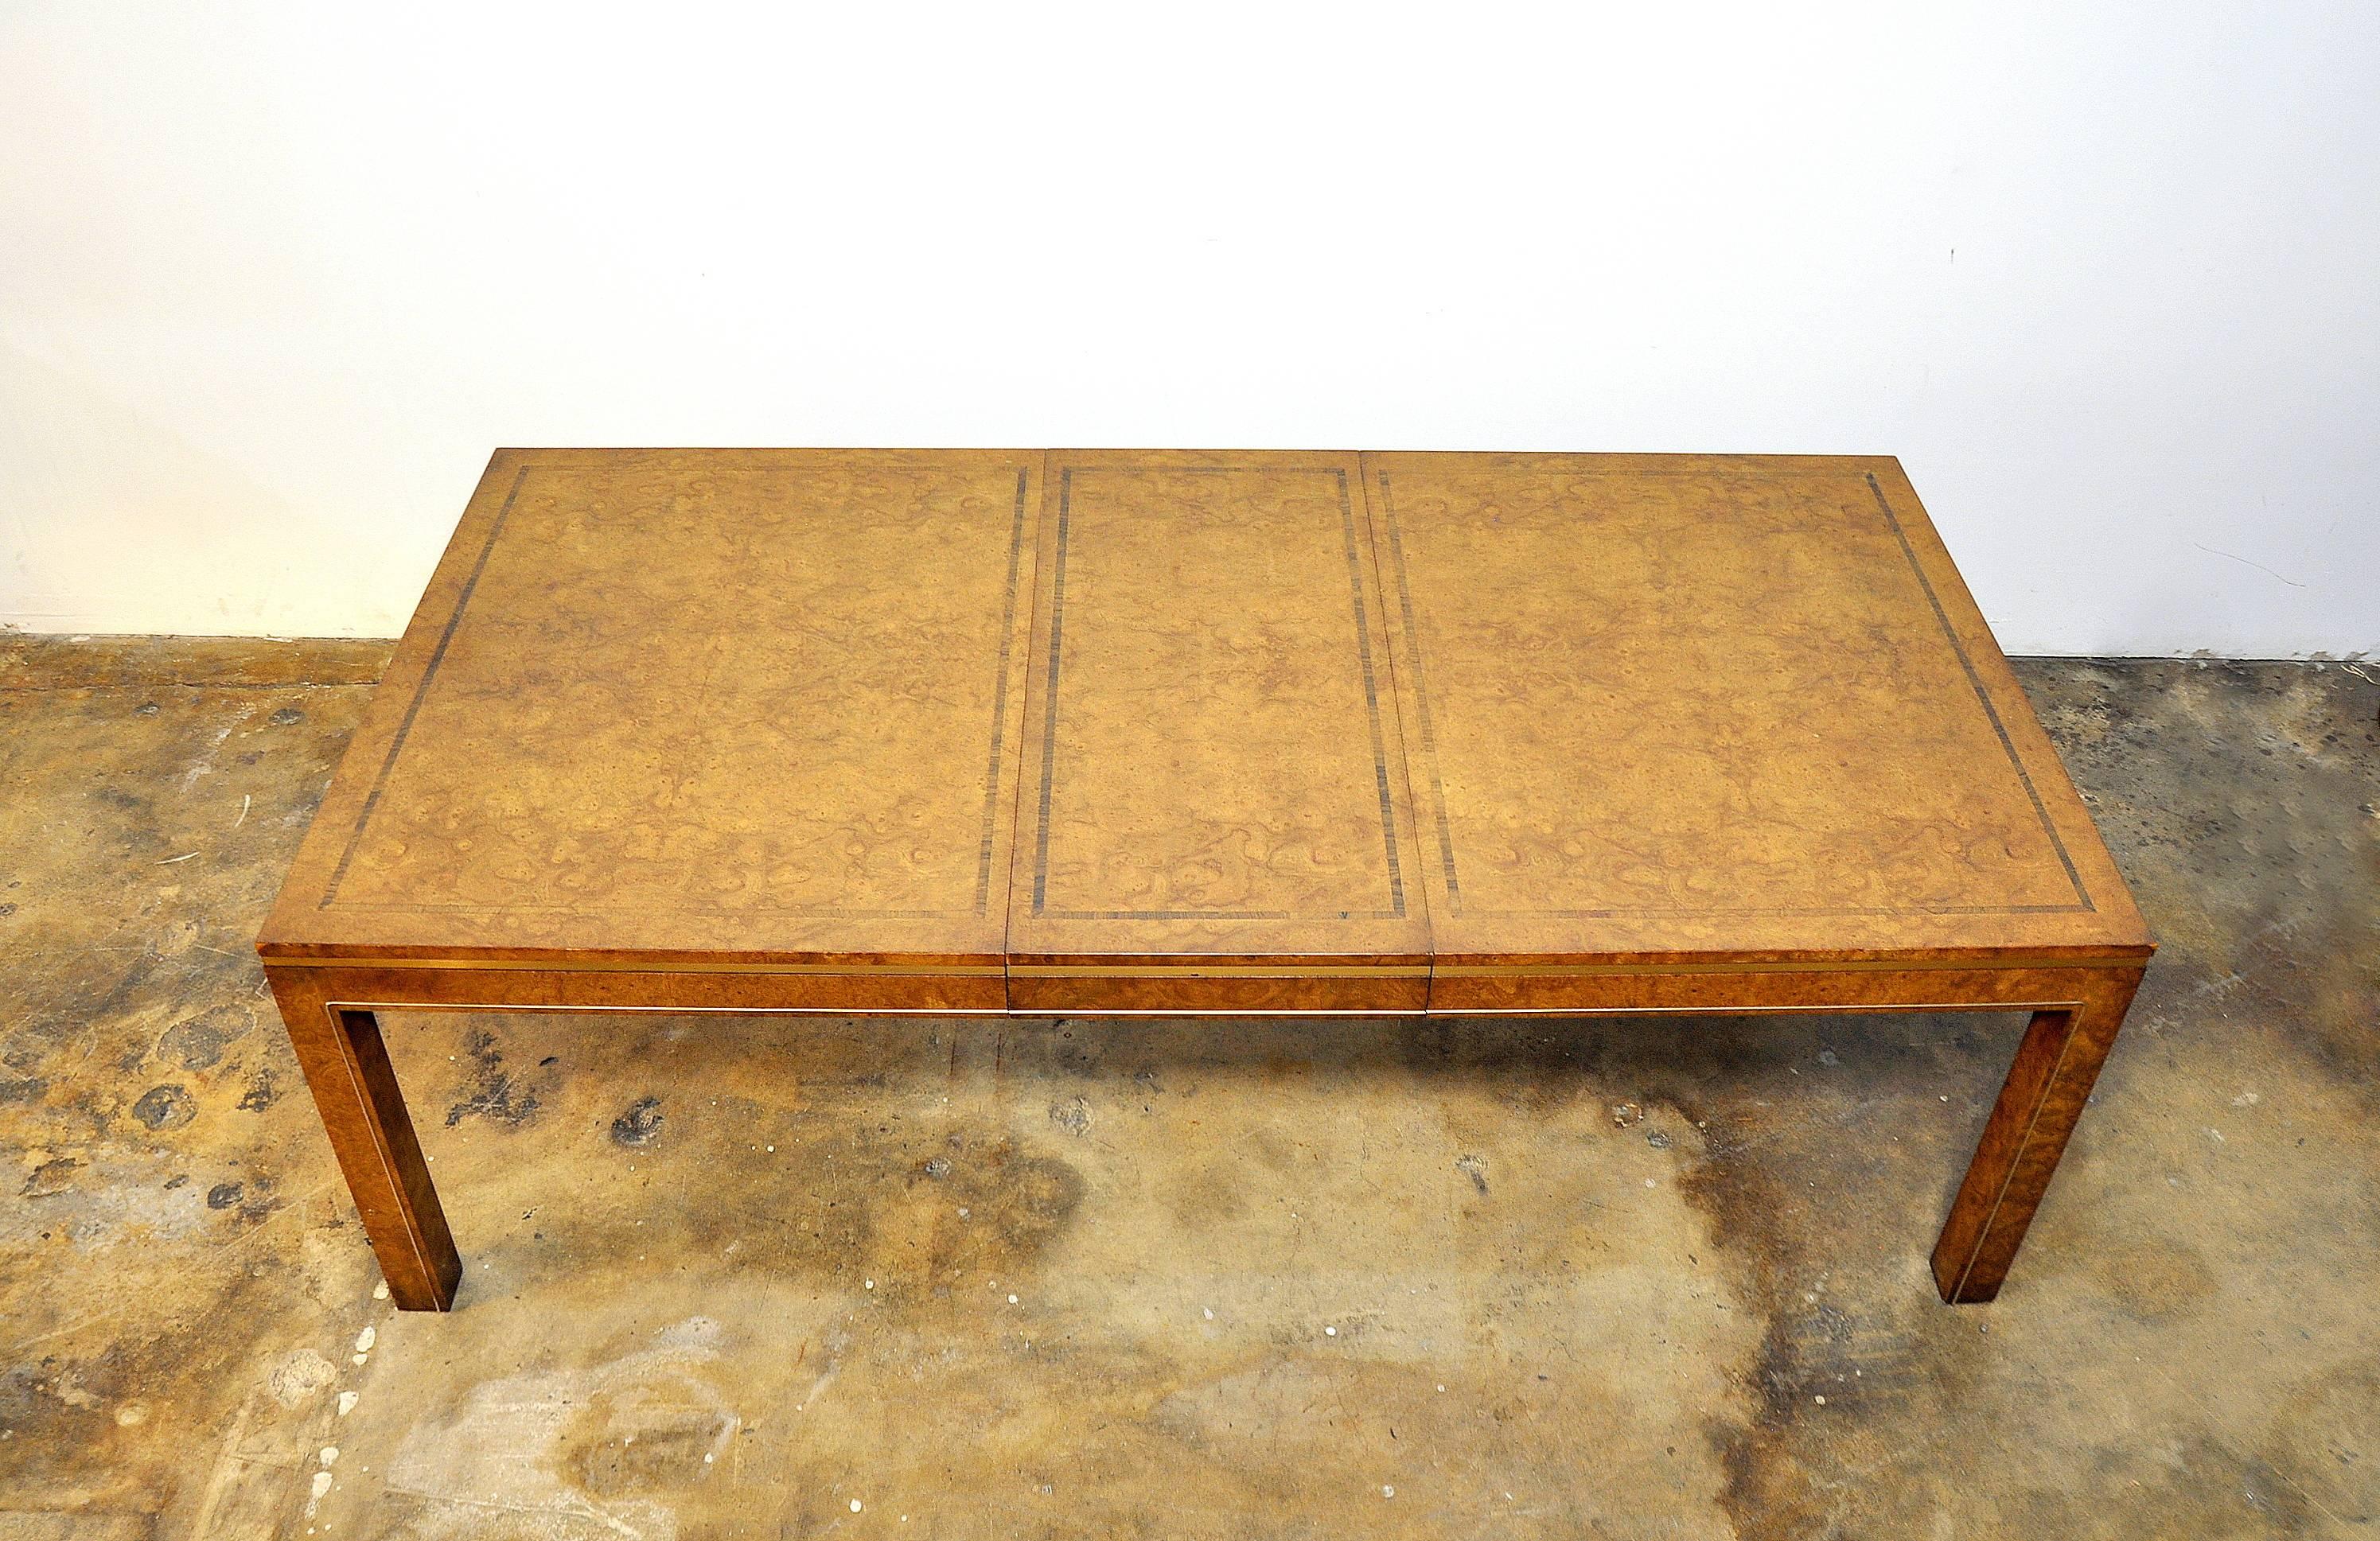 Elegant Mid-Century Modern expandable dining table featuring golden amboyna or maidou burl wood top with rosewood inlay. The table's skirt features brass banding, and the Parsons style legs are further accented by brass inlay. This Hollywood Regency